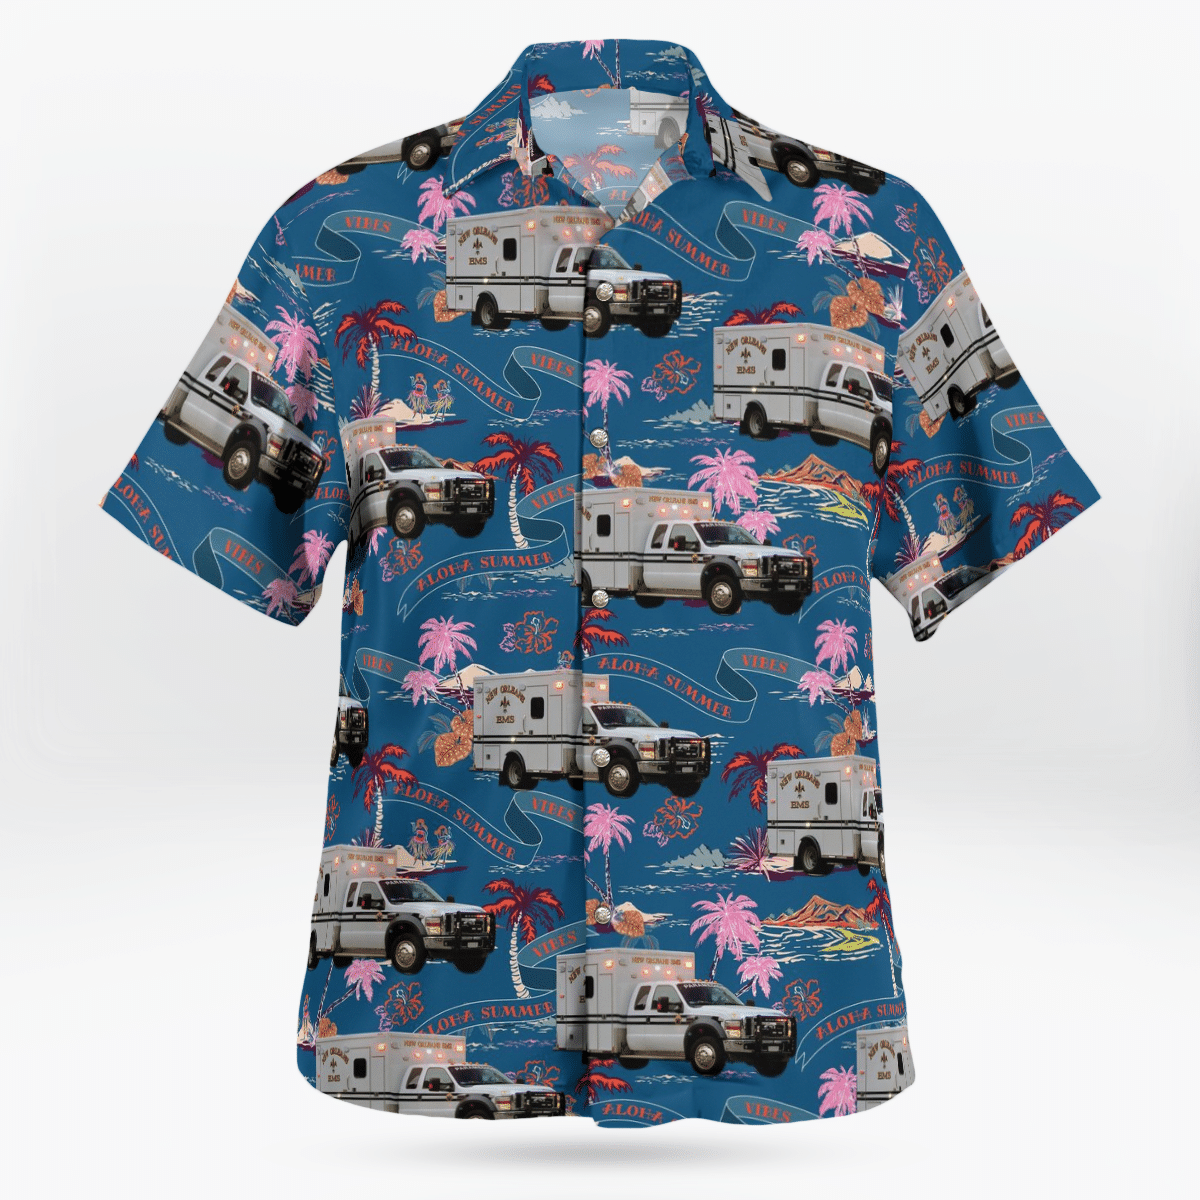 Hawaiian shirts never go out of style 254